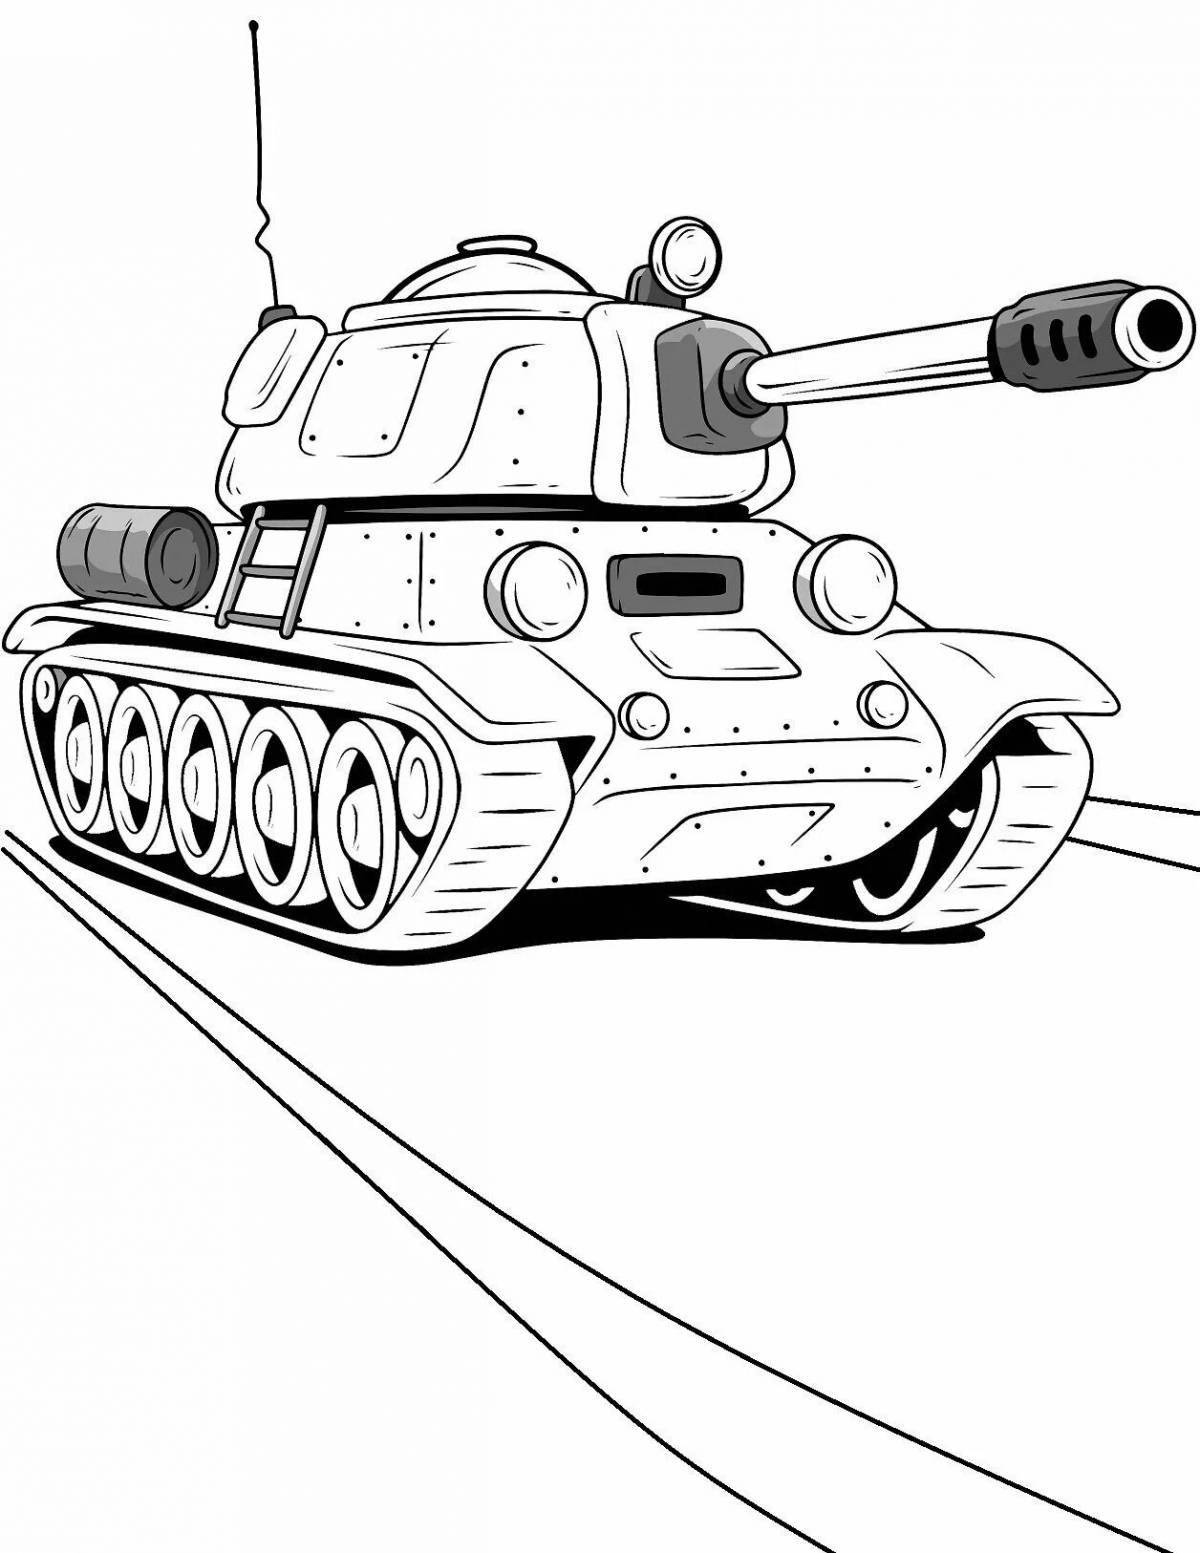 Entertaining coloring t34 tank for kids